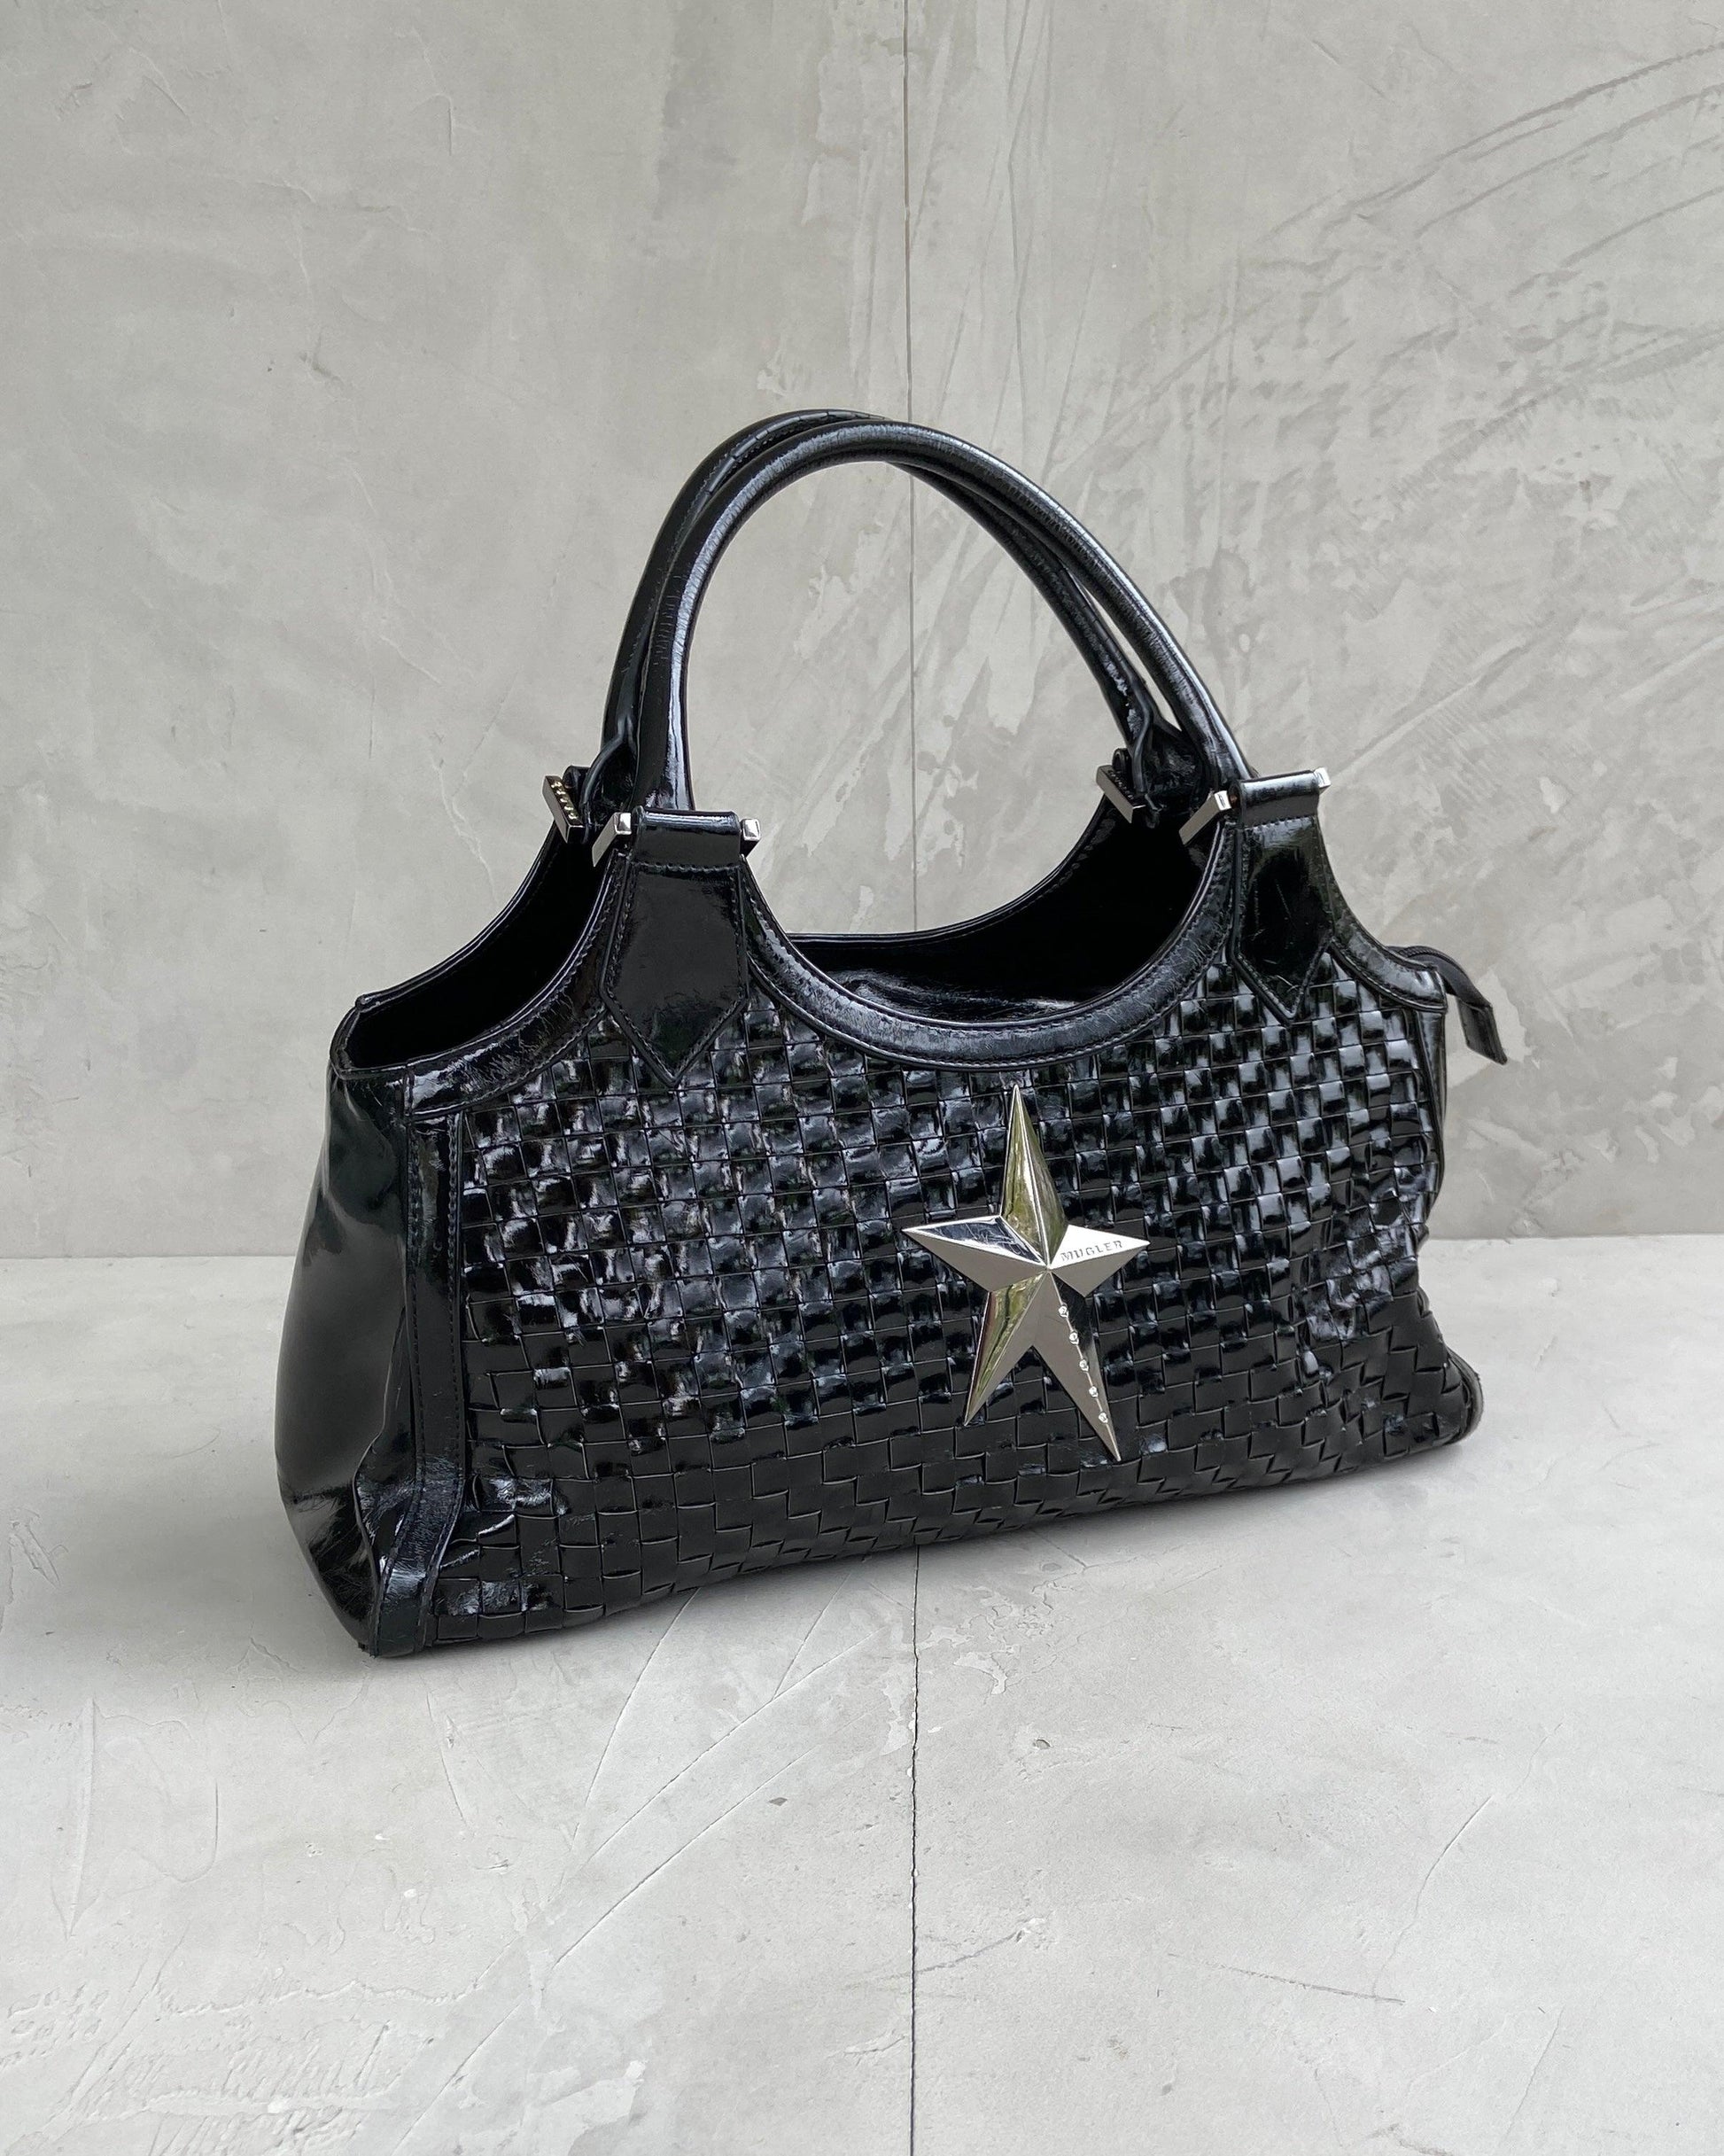 THIERRY MUGLER WOVEN LEATHER STAR HANDBAG - Known Source